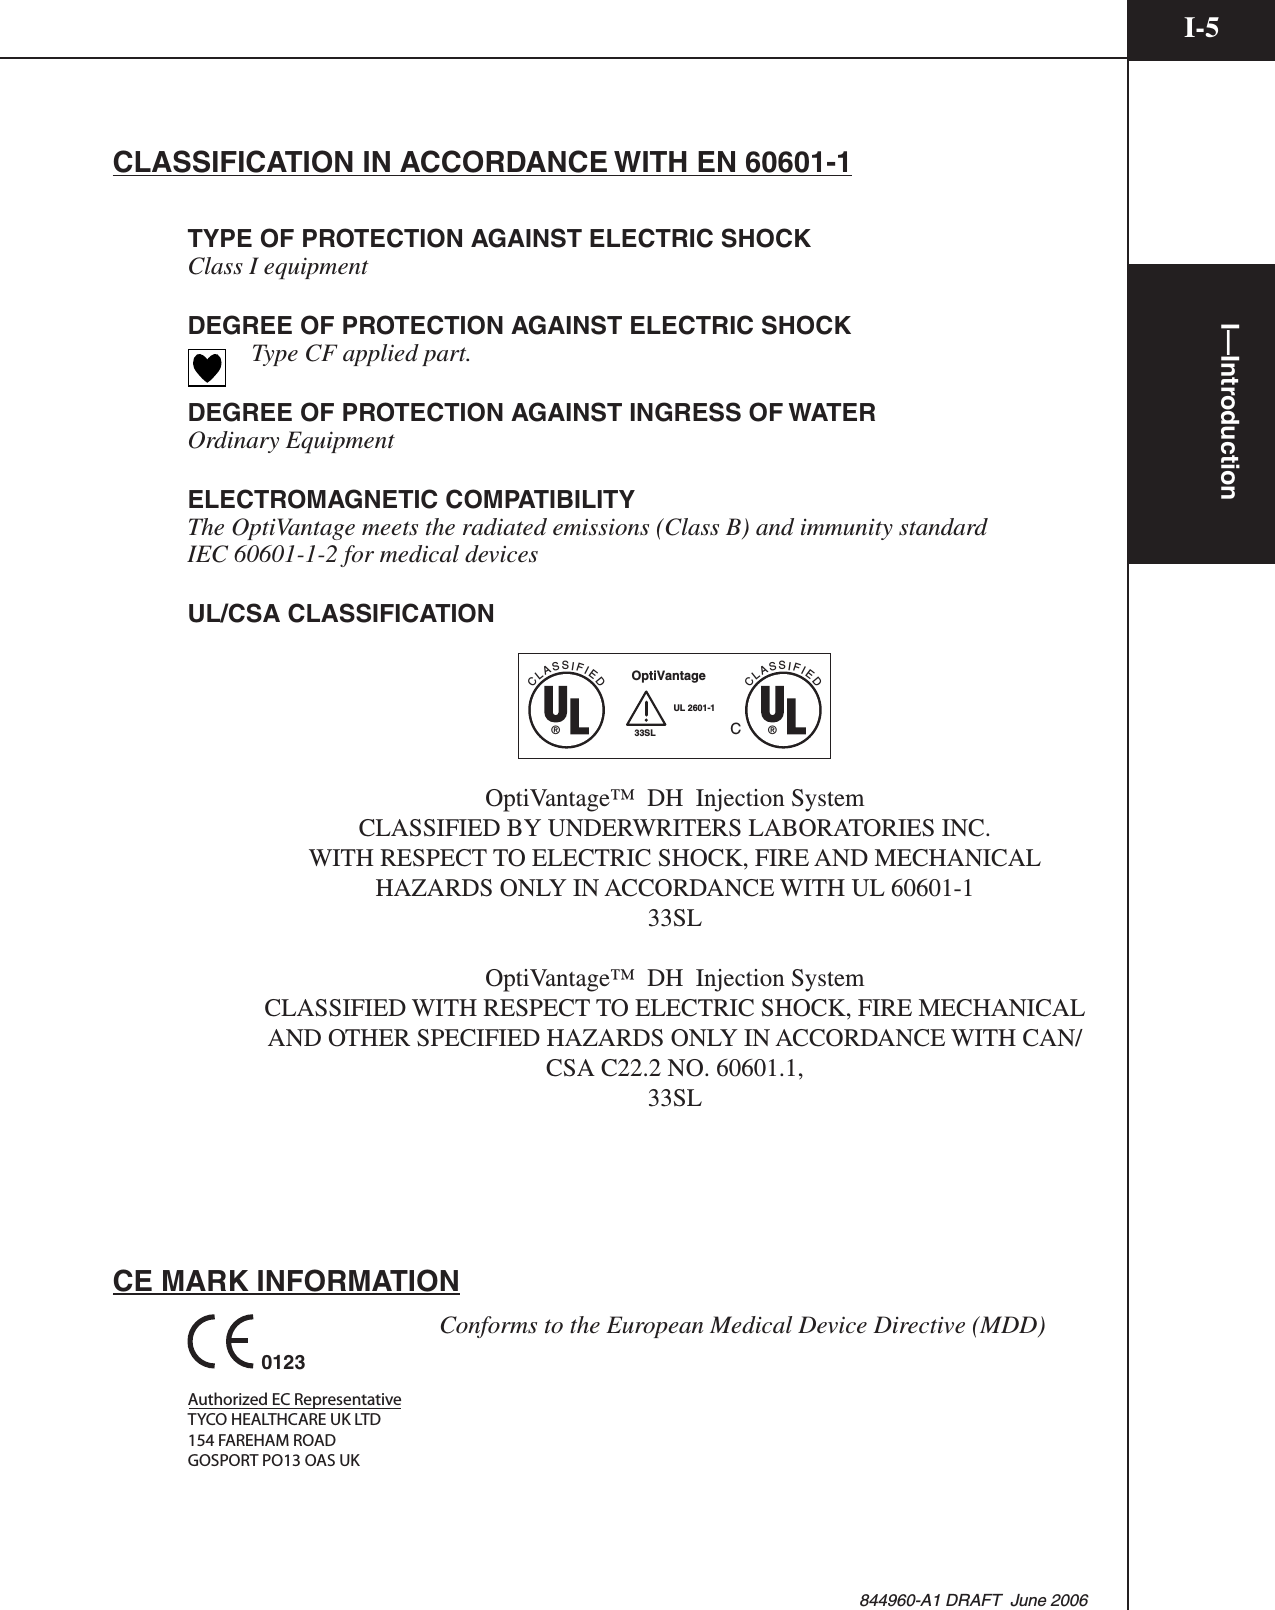 I—IntroductionI-5844960-A1 DRAFT  June 2006CLASSIFICATION IN ACCORDANCE WITH EN 60601-1TYPE OF PROTECTION AGAINST ELECTRIC SHOCKClass I equipmentDEGREE OF PROTECTION AGAINST ELECTRIC SHOCK    Type CF applied part.DEGREE OF PROTECTION AGAINST INGRESS OF WATEROrdinary EquipmentELECTROMAGNETIC COMPATIBILITYThe OptiVantage meets the radiated emissions (Class B) and immunity standardIEC 60601-1-2 for medical devicesUL/CSA CLASSIFICATIONCLASSIFIED®CLASSIFIED®OptiVantageC33SLUL 2601-1OptiVantage™  DH  Injection SystemCLASSIFIED BY UNDERWRITERS LABORATORIES INC. WITH RESPECT TO ELECTRIC SHOCK, FIRE AND MECHANICAL HAZARDS ONLY IN ACCORDANCE WITH UL 60601-1 33SLOptiVantage™  DH  Injection System CLASSIFIED WITH RESPECT TO ELECTRIC SHOCK, FIRE MECHANICAL AND OTHER SPECIFIED HAZARDS ONLY IN ACCORDANCE WITH CAN/CSA C22.2 NO. 60601.1,33SLCE MARK INFORMATION0123Authorized EC RepresentativeTYCO HEALTHCARE UK LTD154 FAREHAM ROADGOSPORT PO13 OAS UK      Conforms to the European Medical Device Directive (MDD)